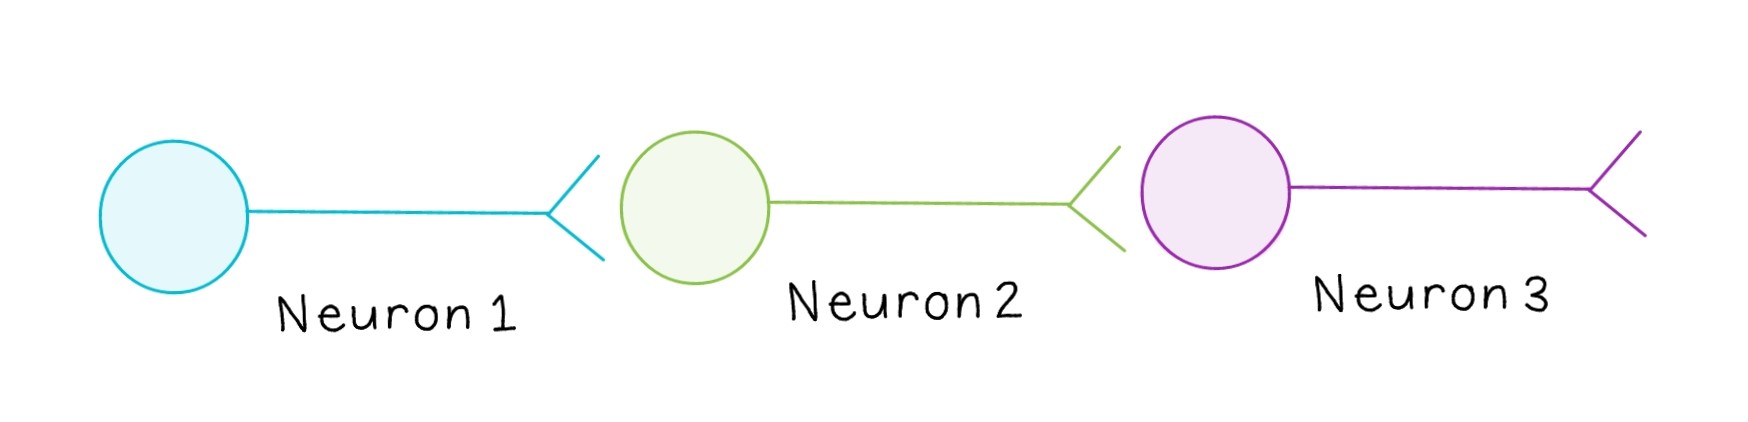 3 neurons synapsing onto each other